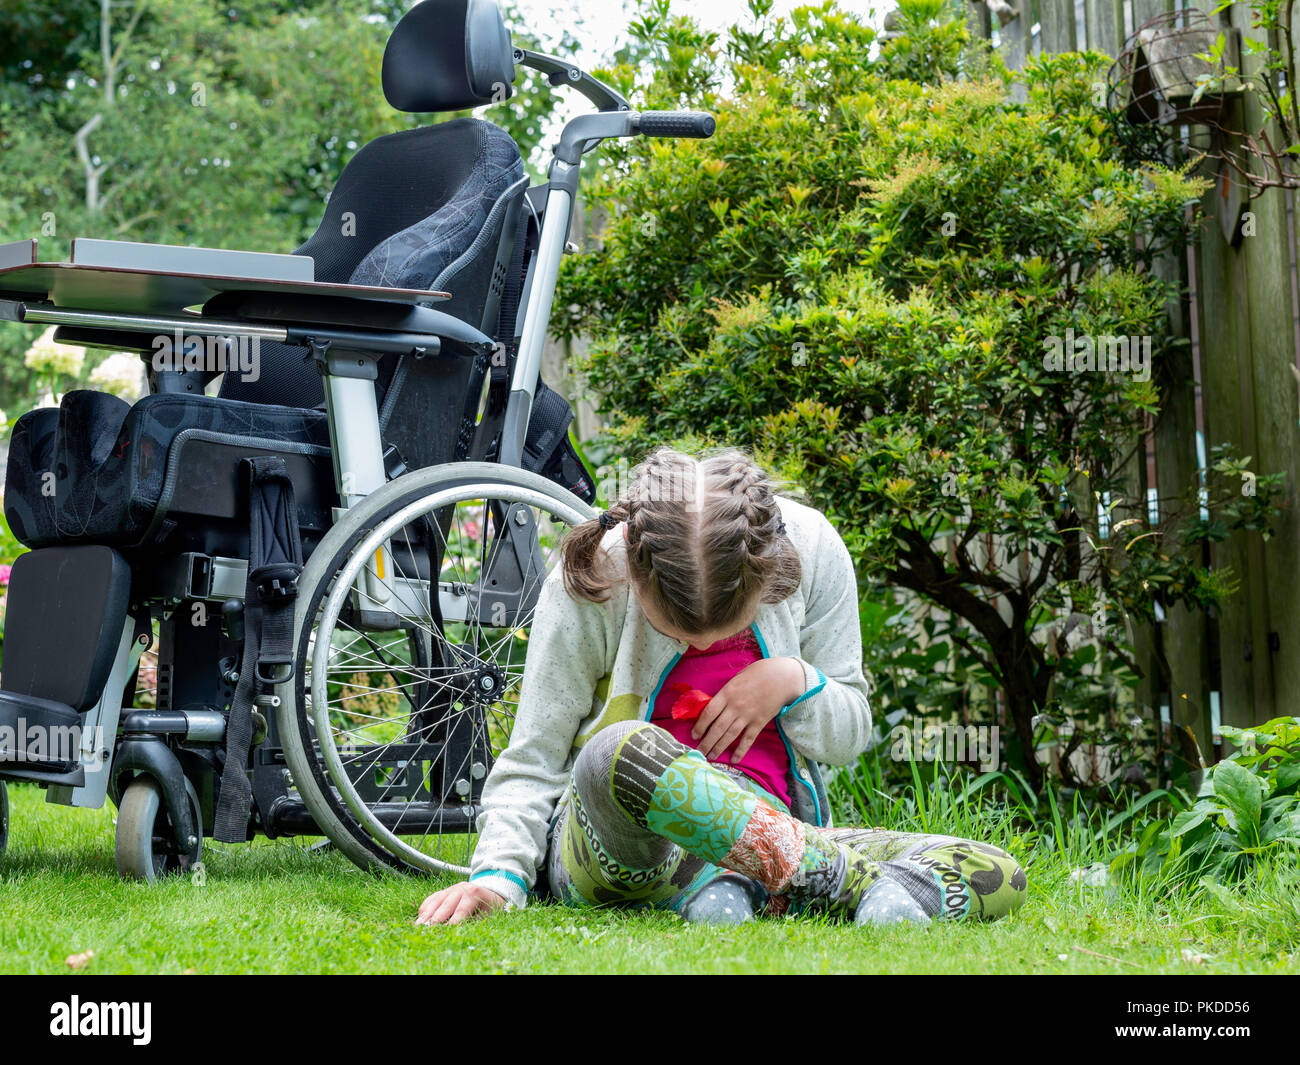 A disabled child having a break from sitting in her wheelchair to explore her natural surroundings Stock Photo